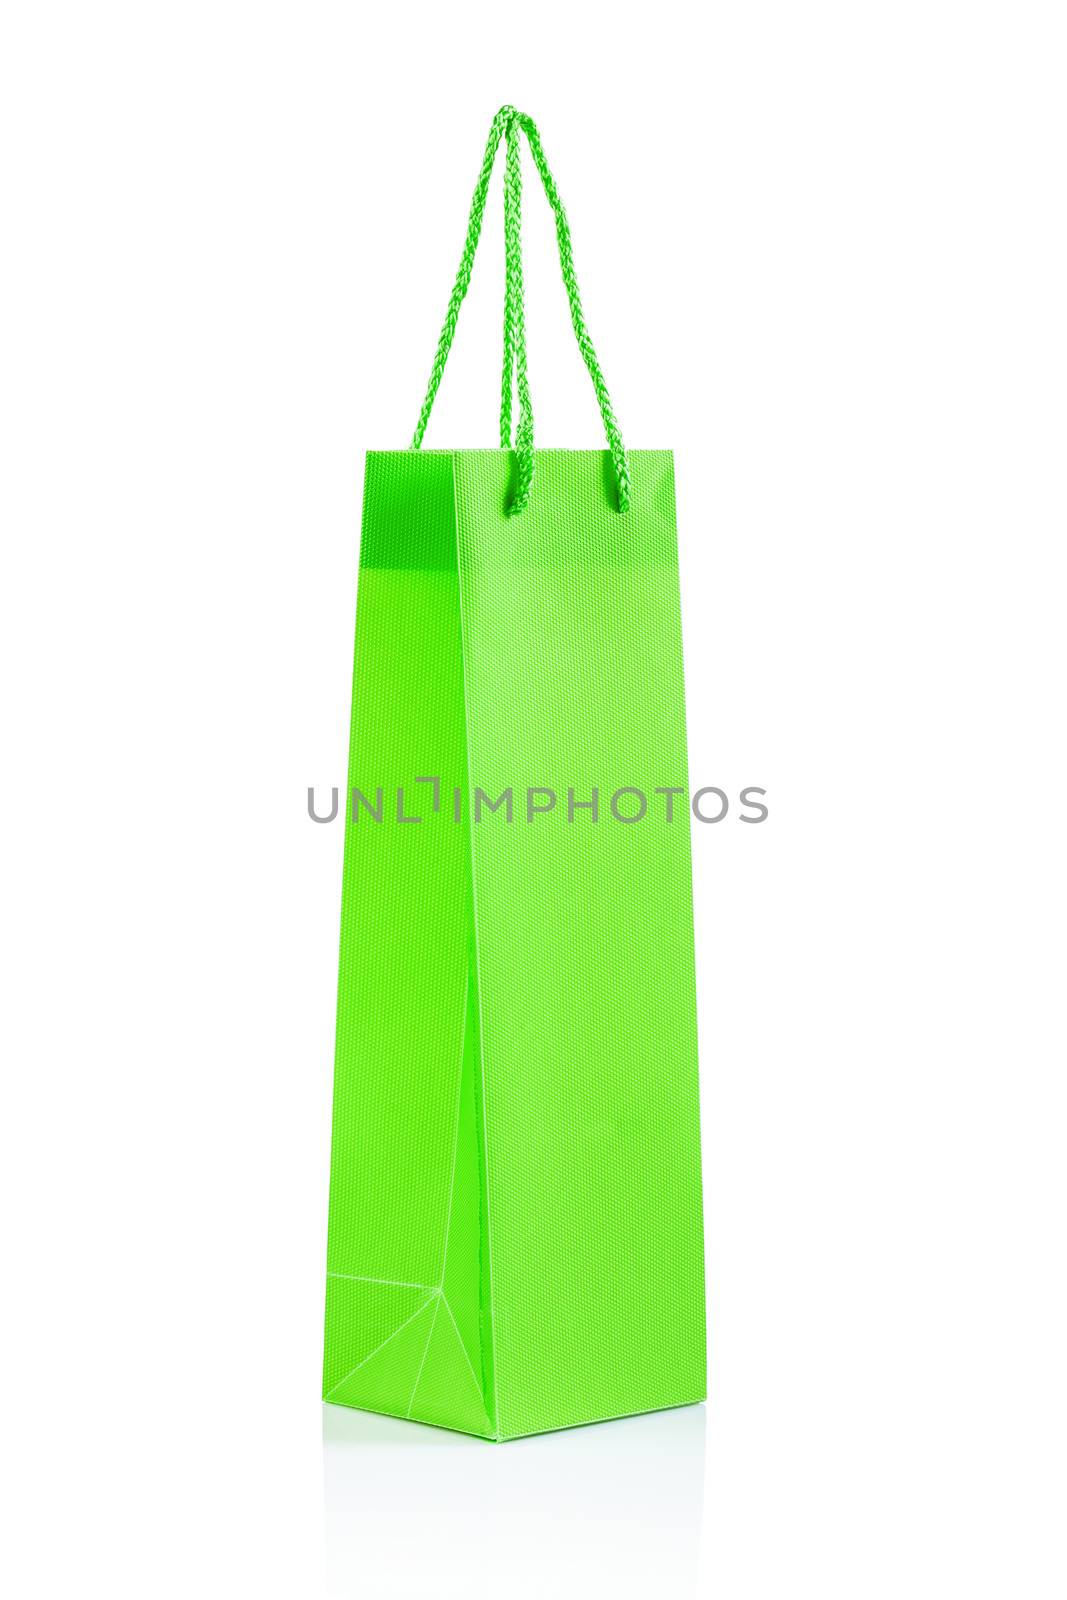 a single green paper bag isolated by mihalec